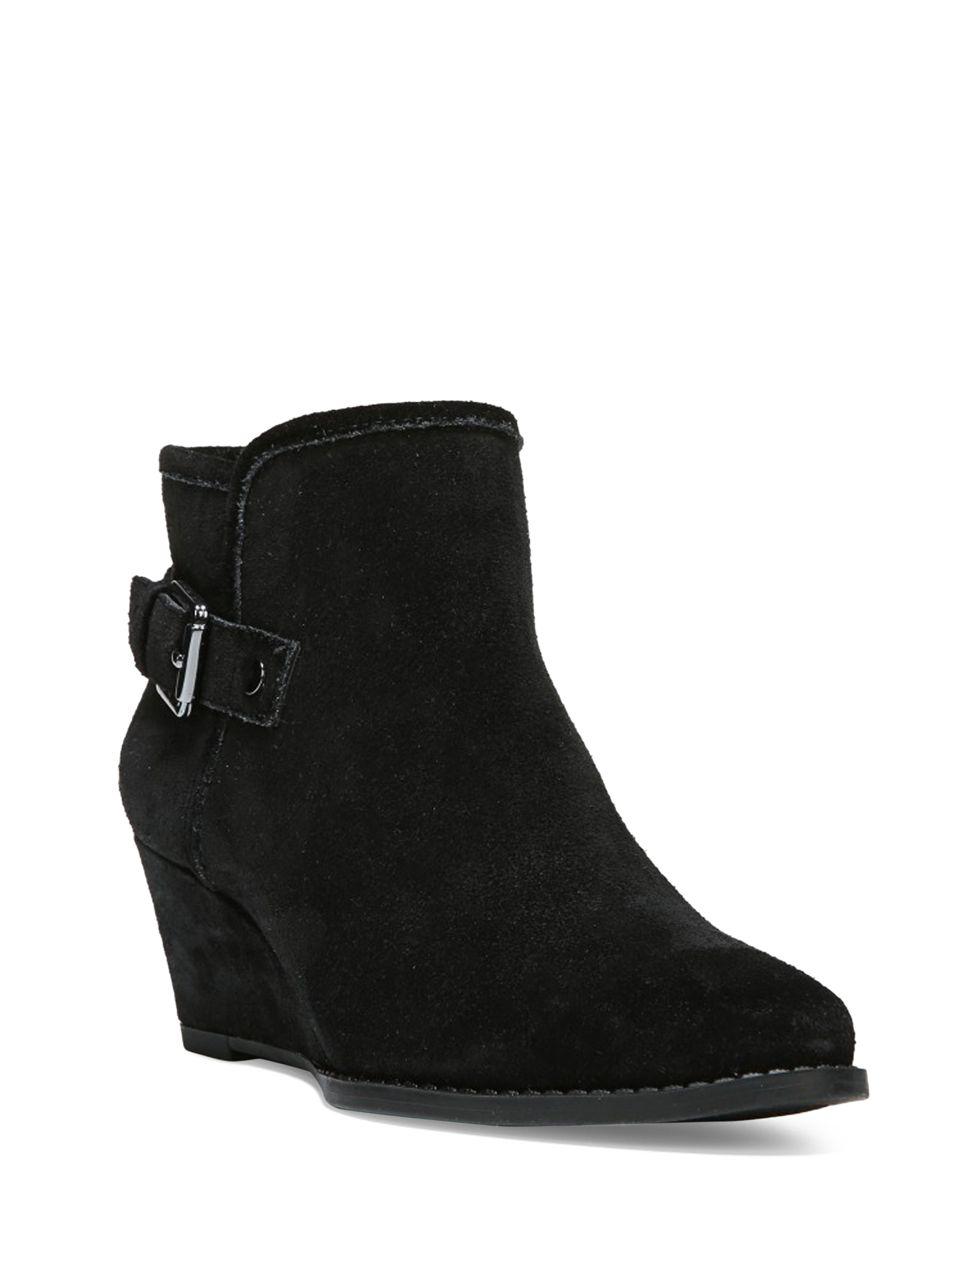 Franco sarto Wichita Suede Wedge Boots in Black - Save 30% | Lyst